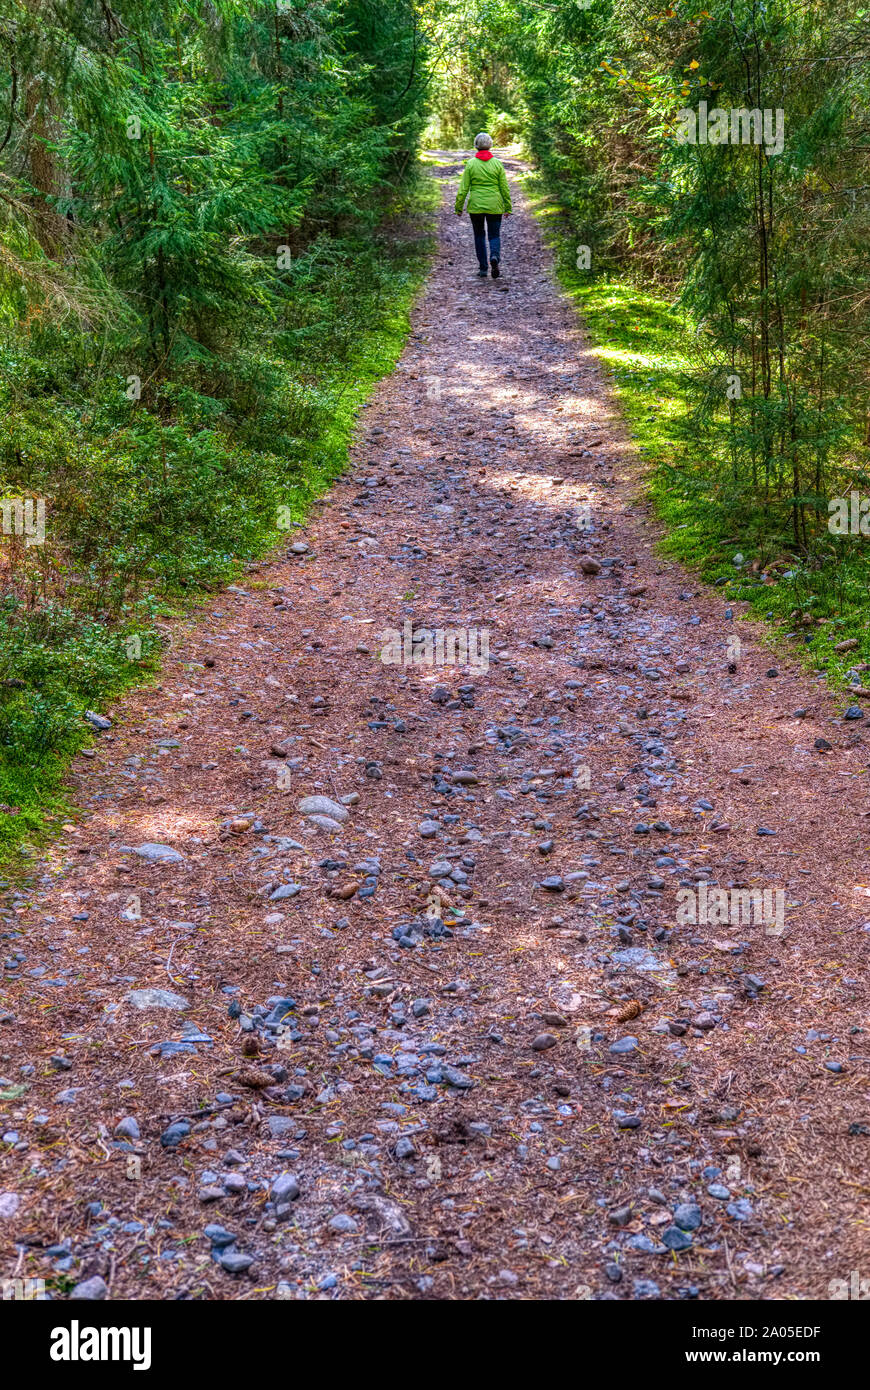 Woman walking alone on a path in a forest in autumn Stock Photo